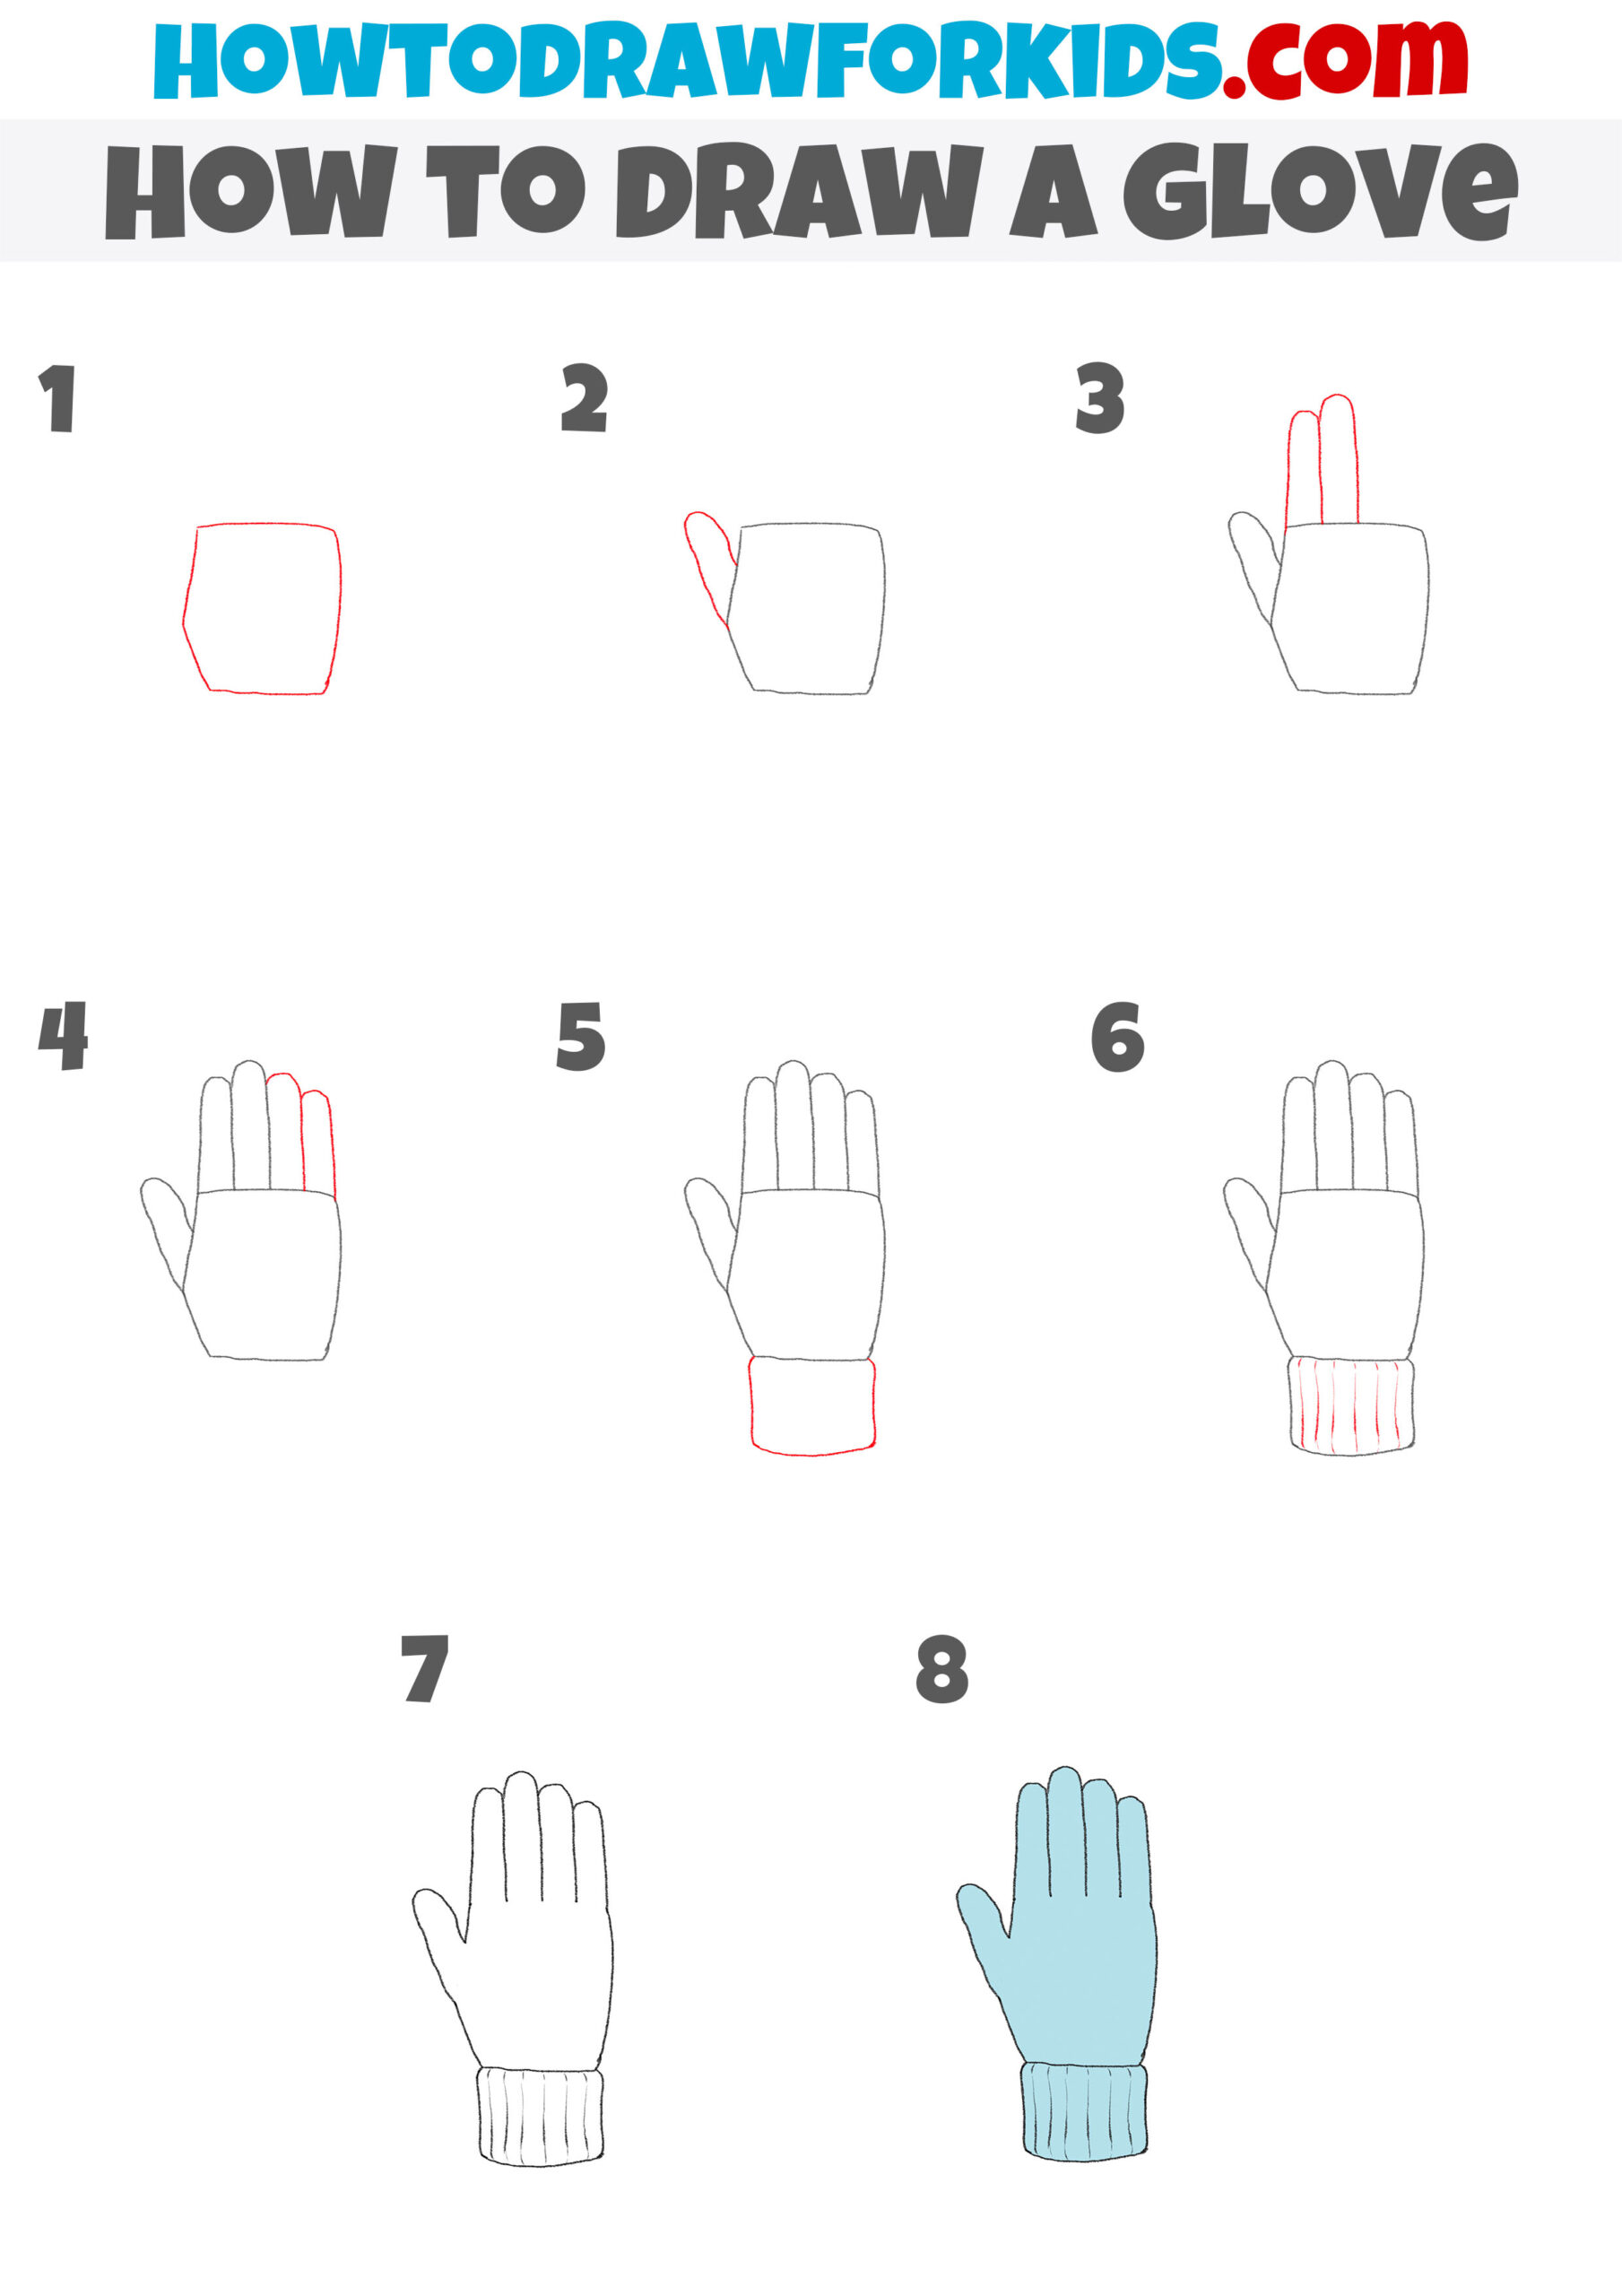 how to draw a glove step by step